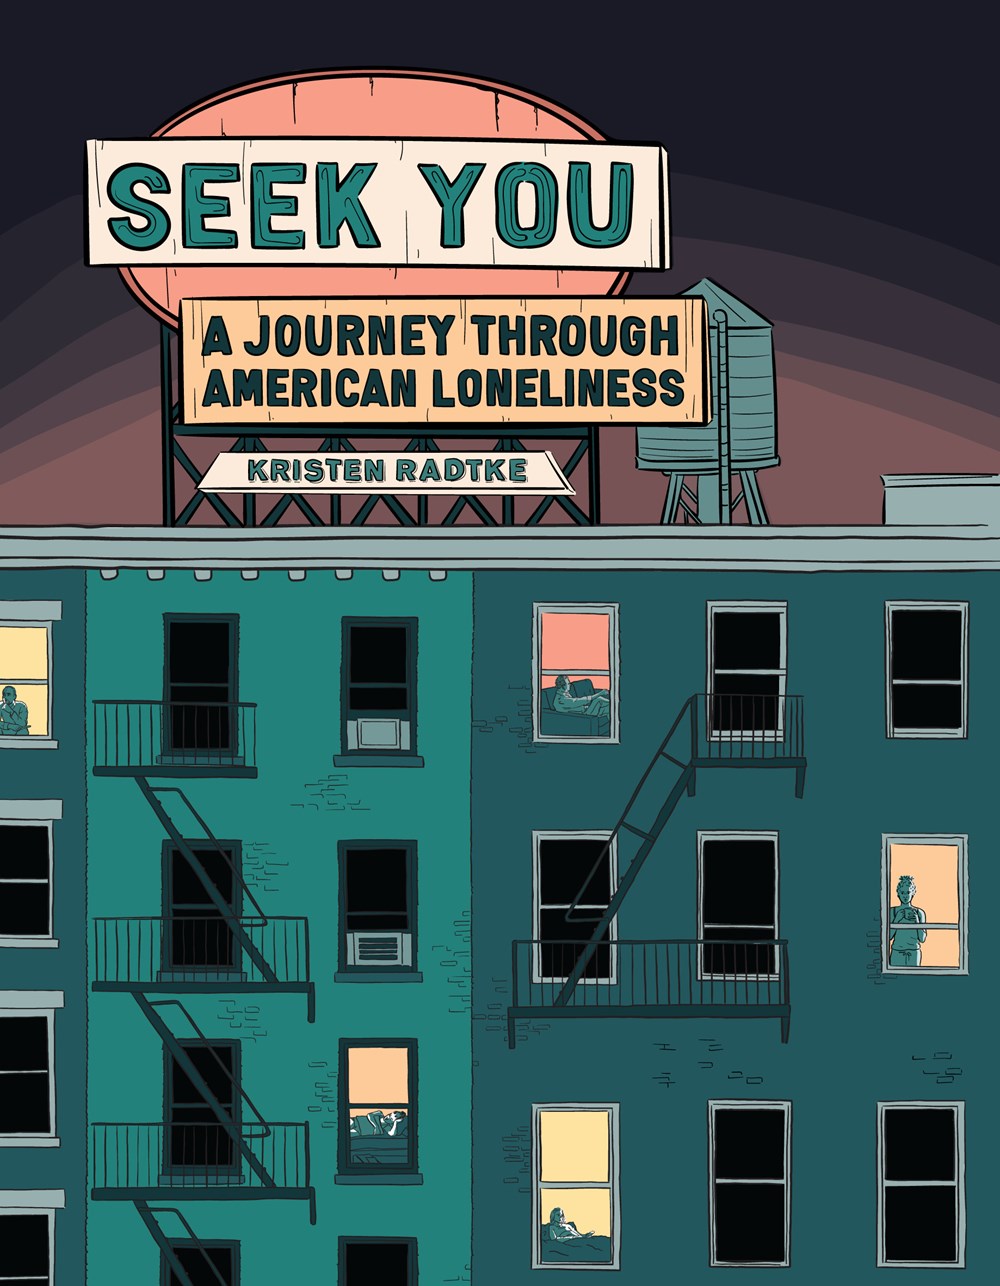 Image for "Seek You"